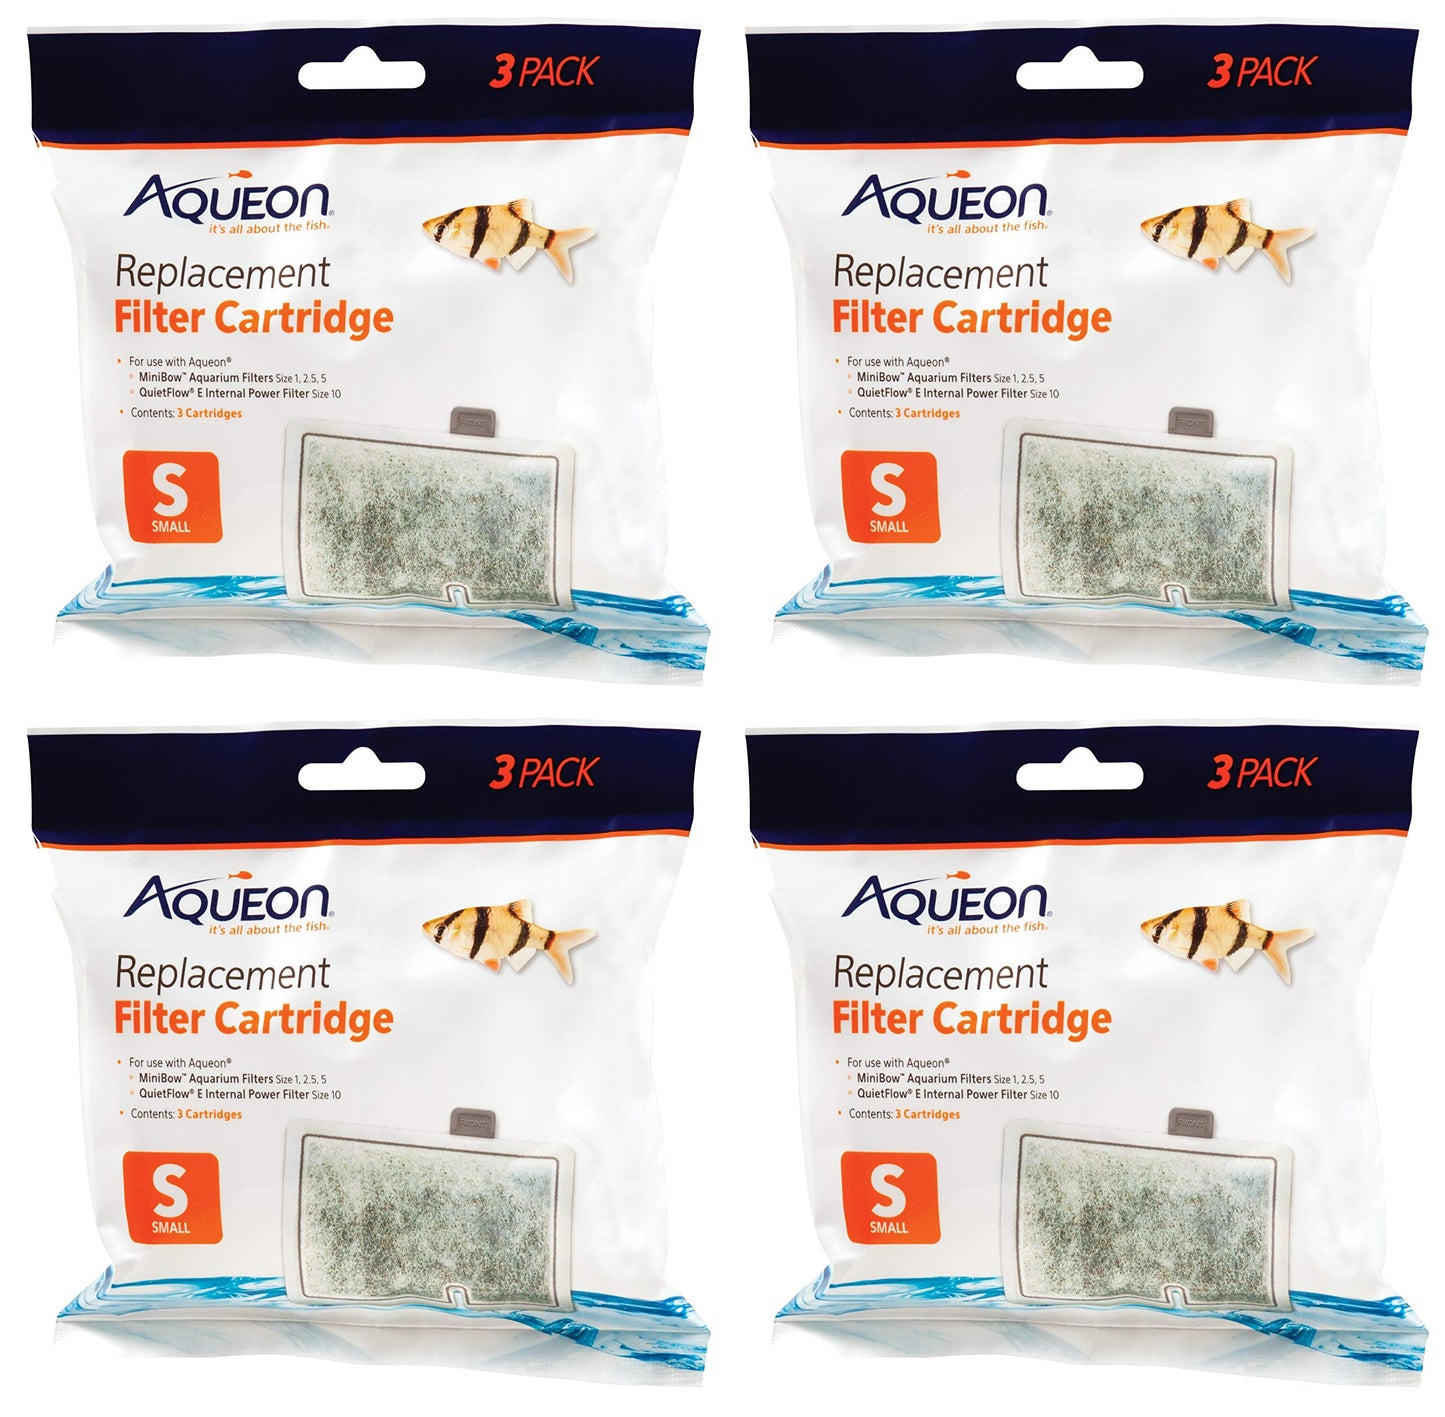 Aqueon 4 Pack of MiniBow Replacement Filter Cartridges, 3 Small Cartridges Each